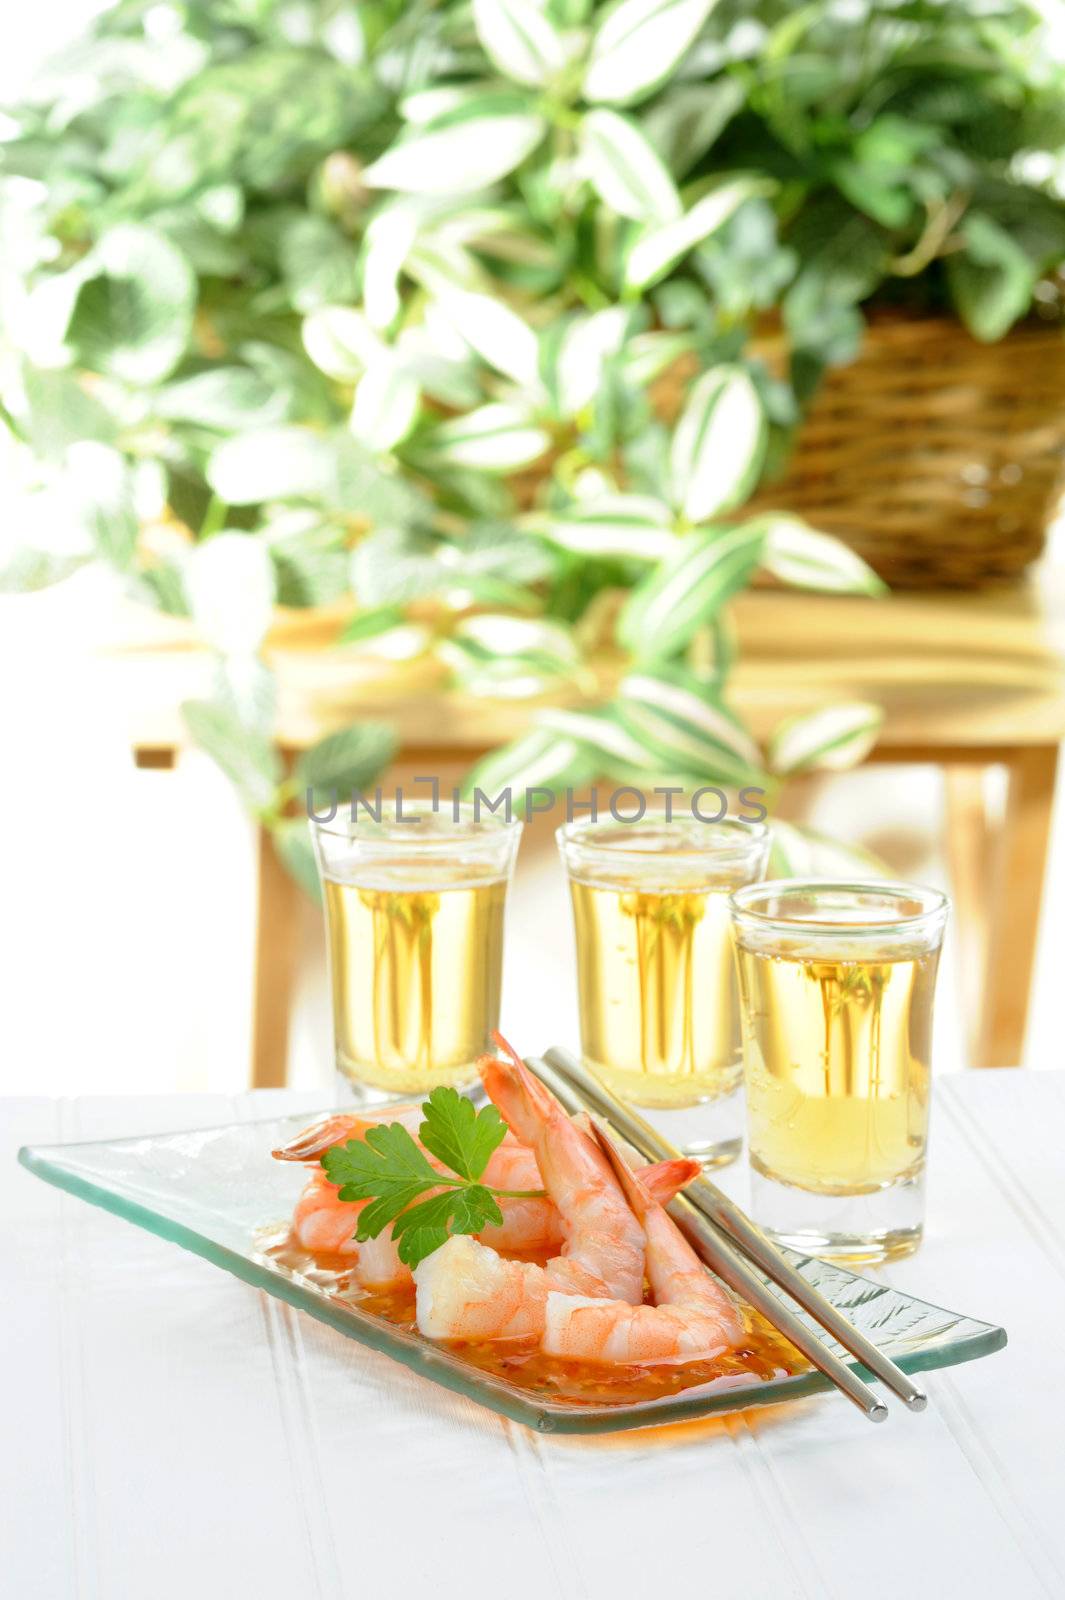 Oriental style shrimp appetizer served with small glasses of beer.